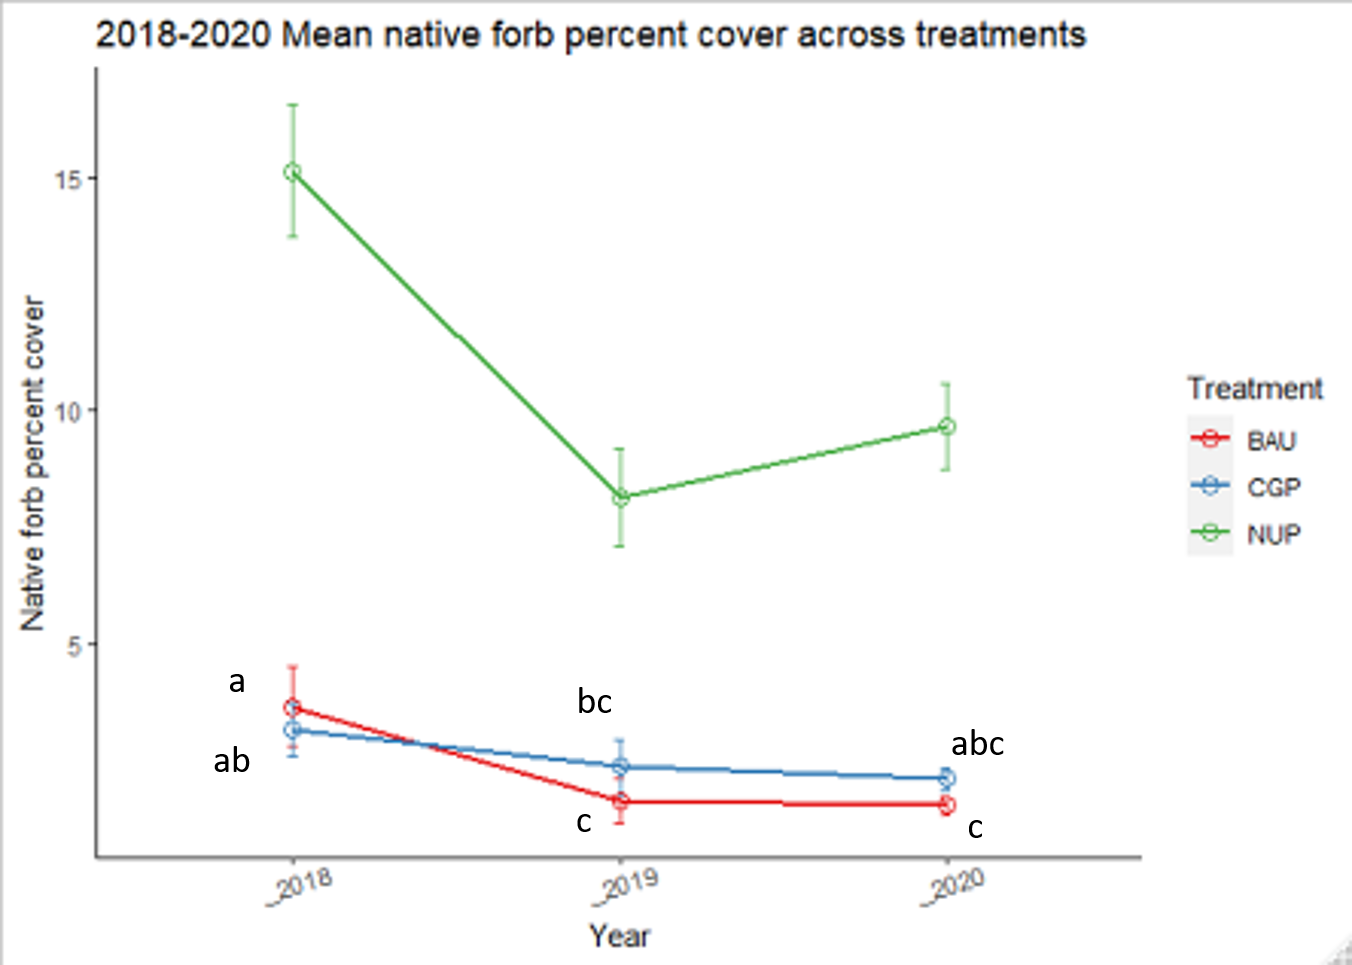 Average percent cover of native forbs across treatments over time. Error bars represent ±1 SE. Points with different letters are significantly different from each other as determined by post-hoc analysis of the fitted beta GLMM comparing CGP to BAU over time. 